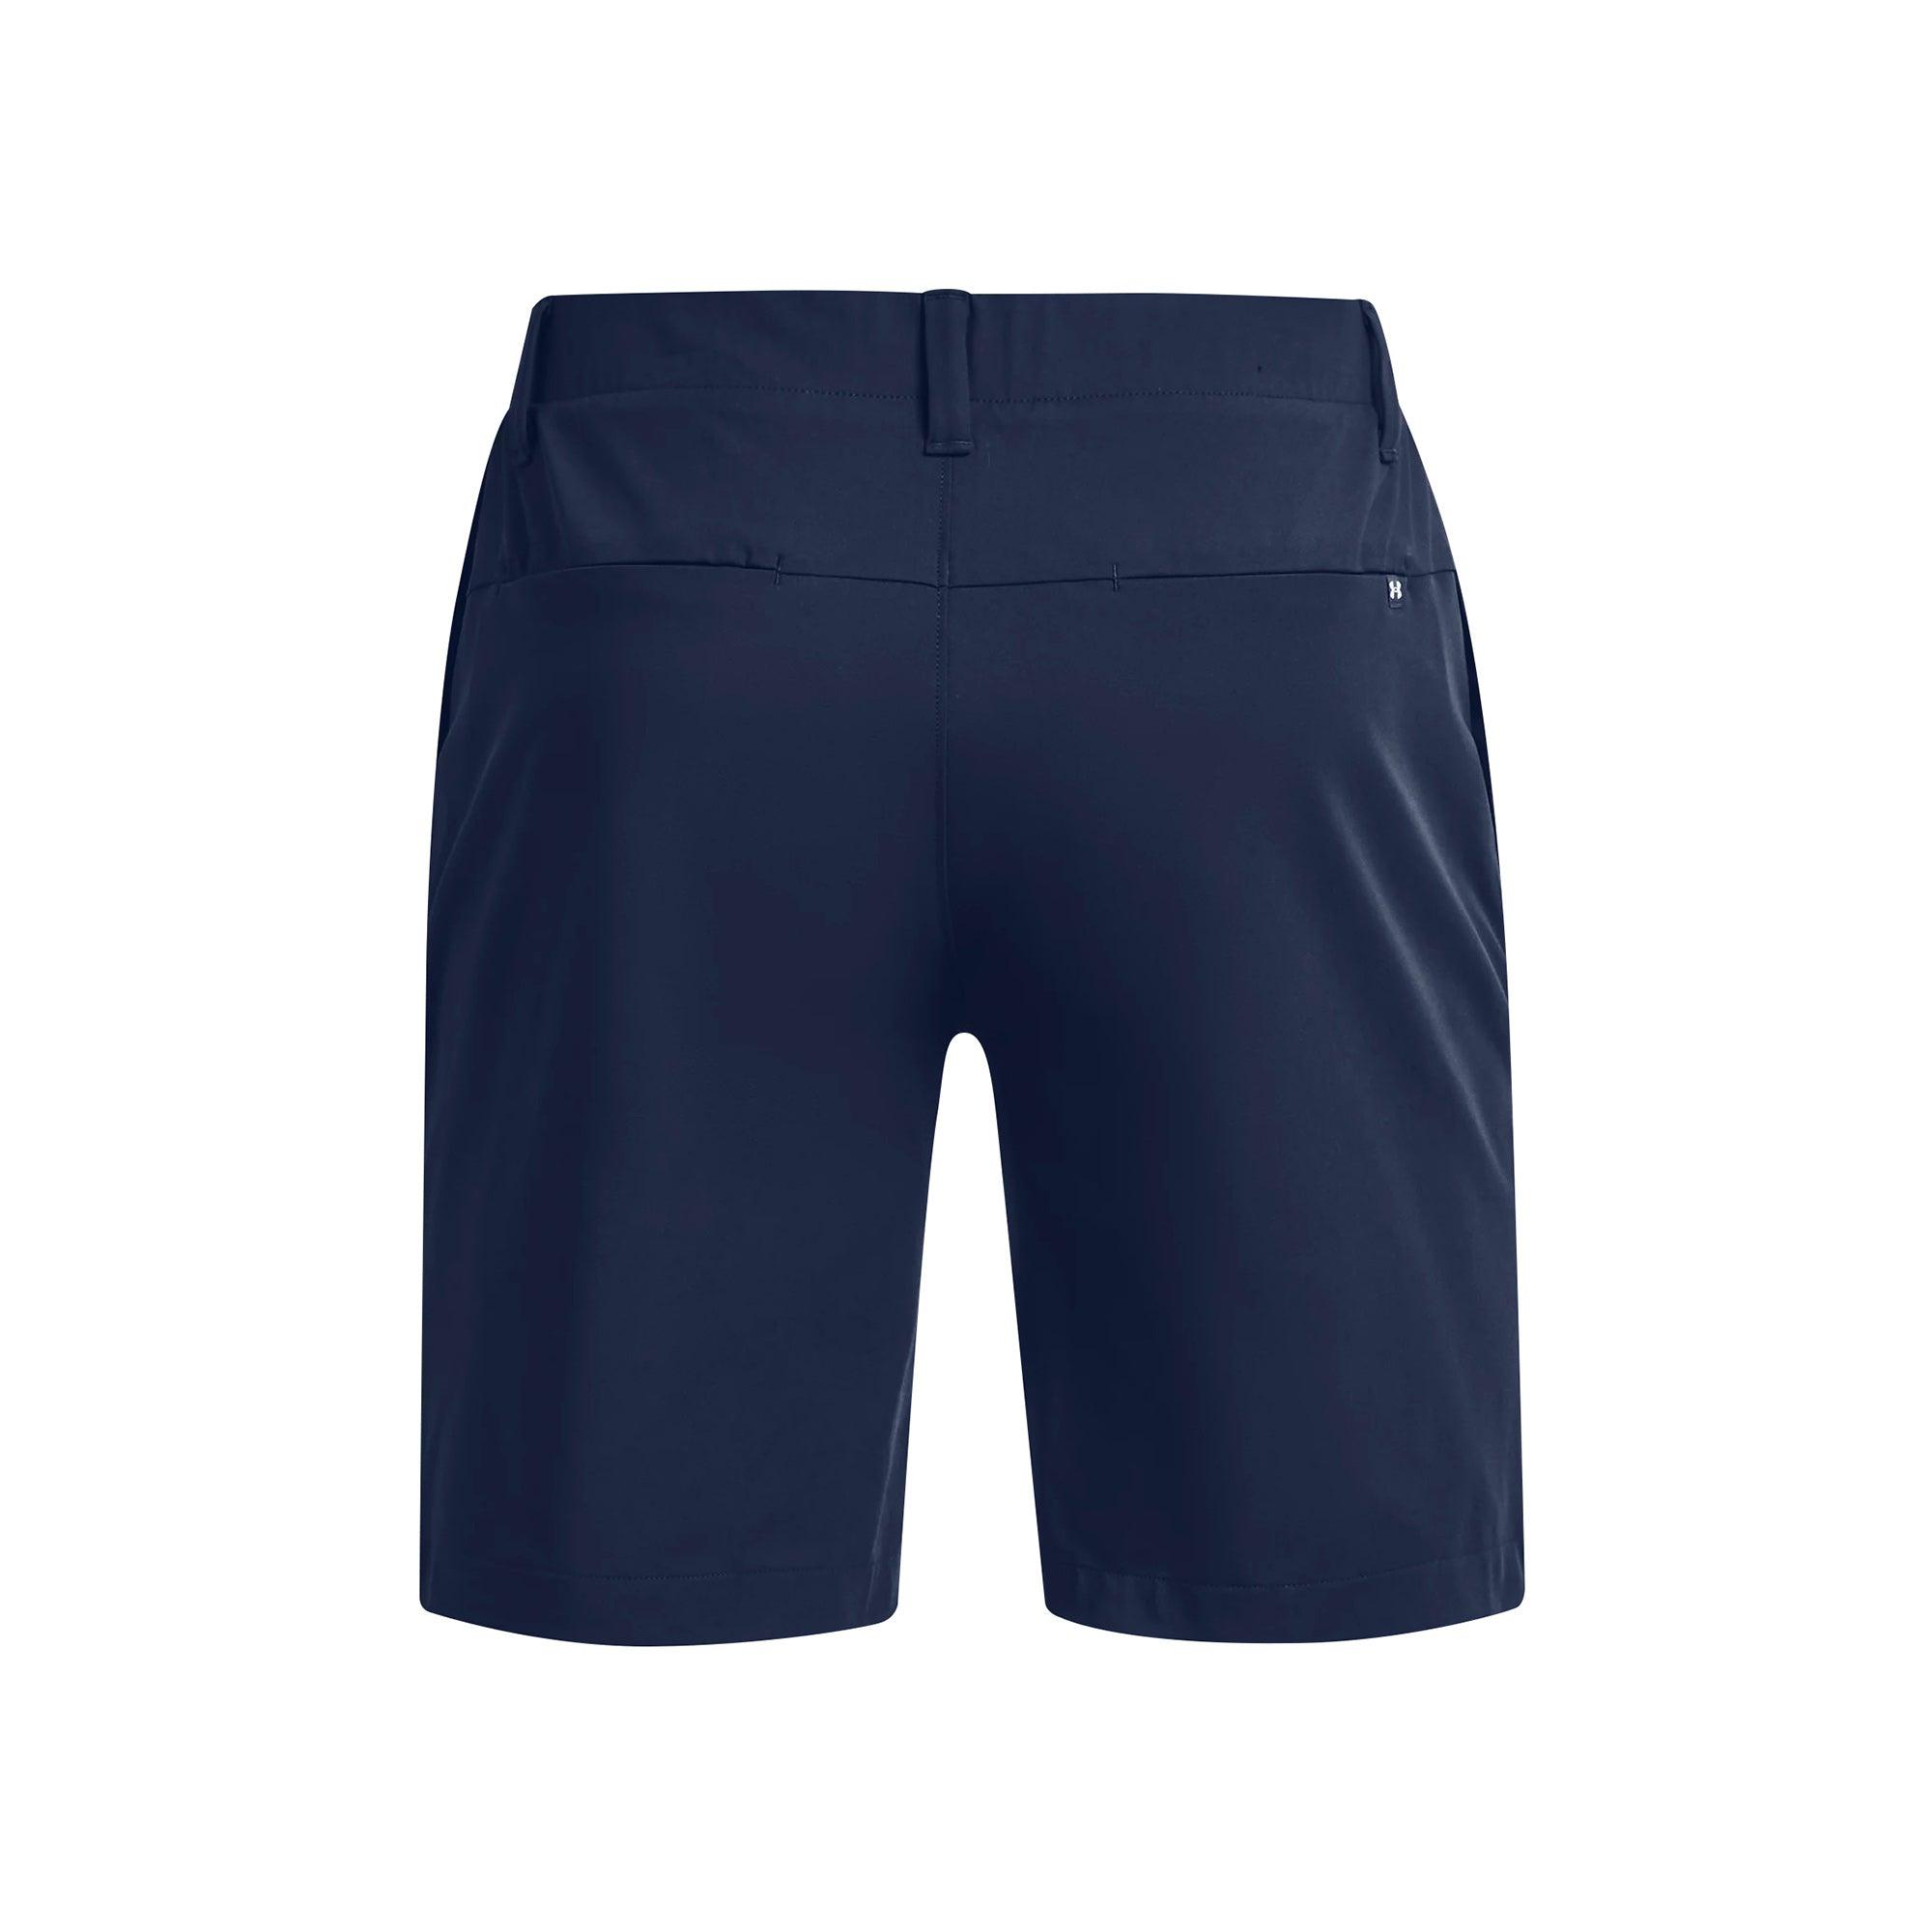 Quần ngắn thể thao nam Under Armour Iso-Chill - 1370083-408